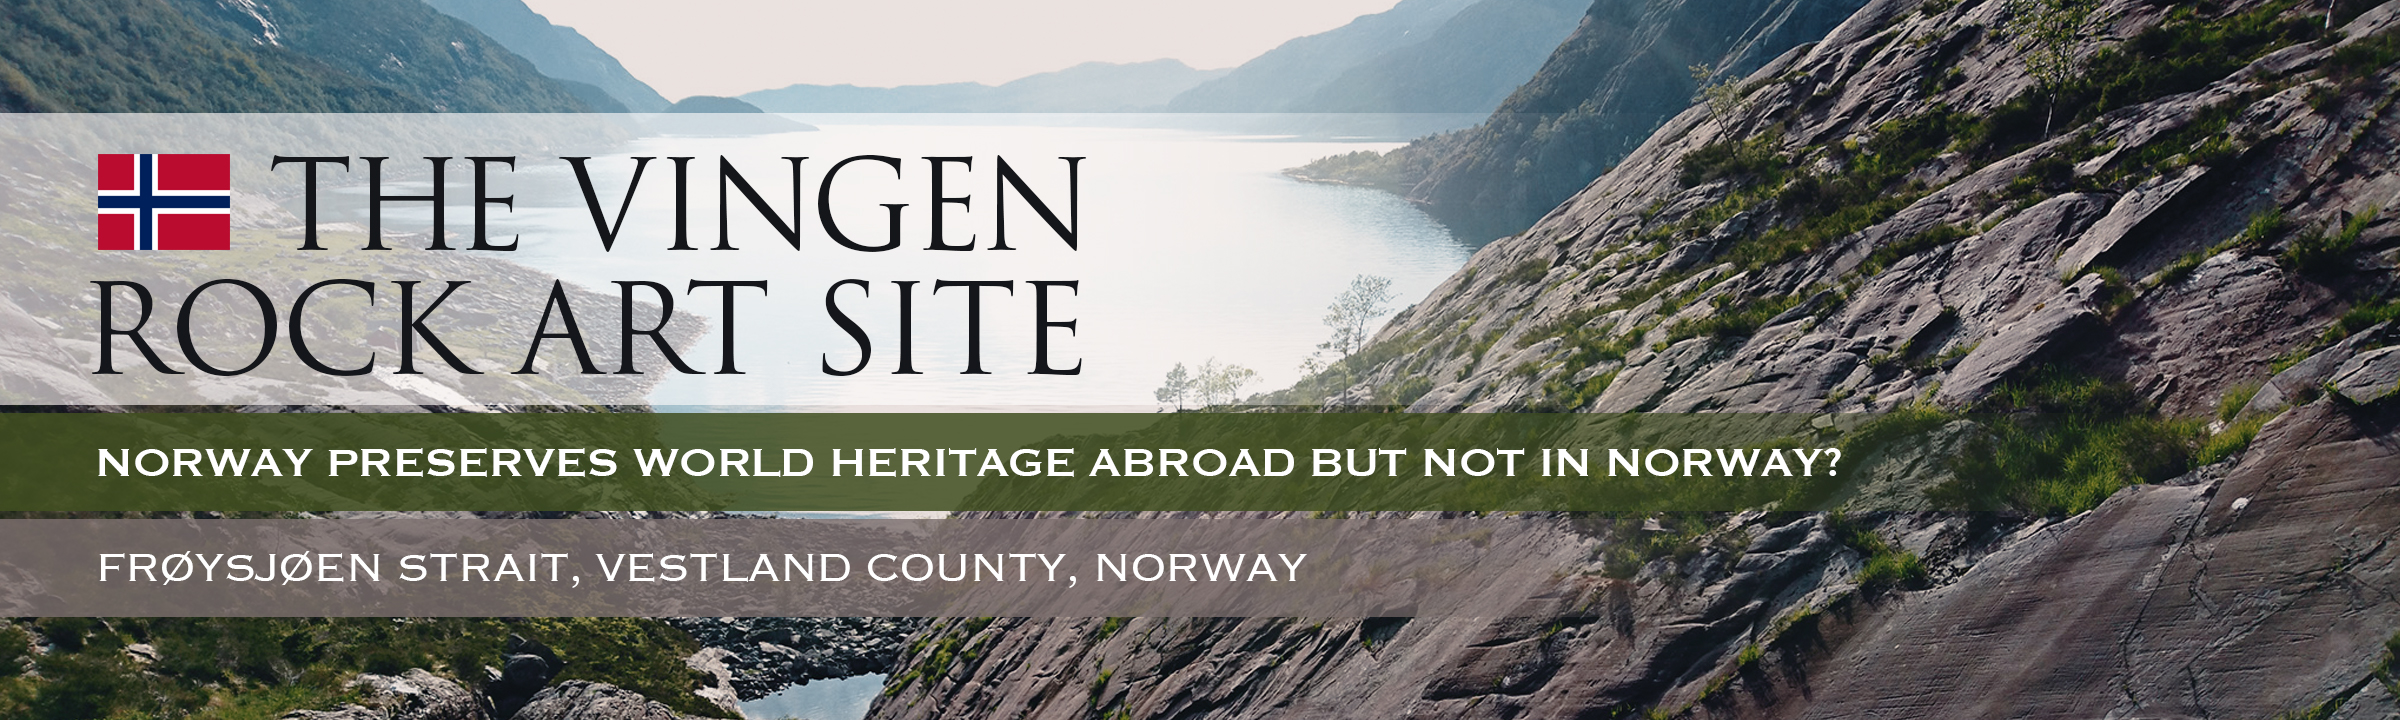 Norway preserves world heritage abroad but not in Norway?